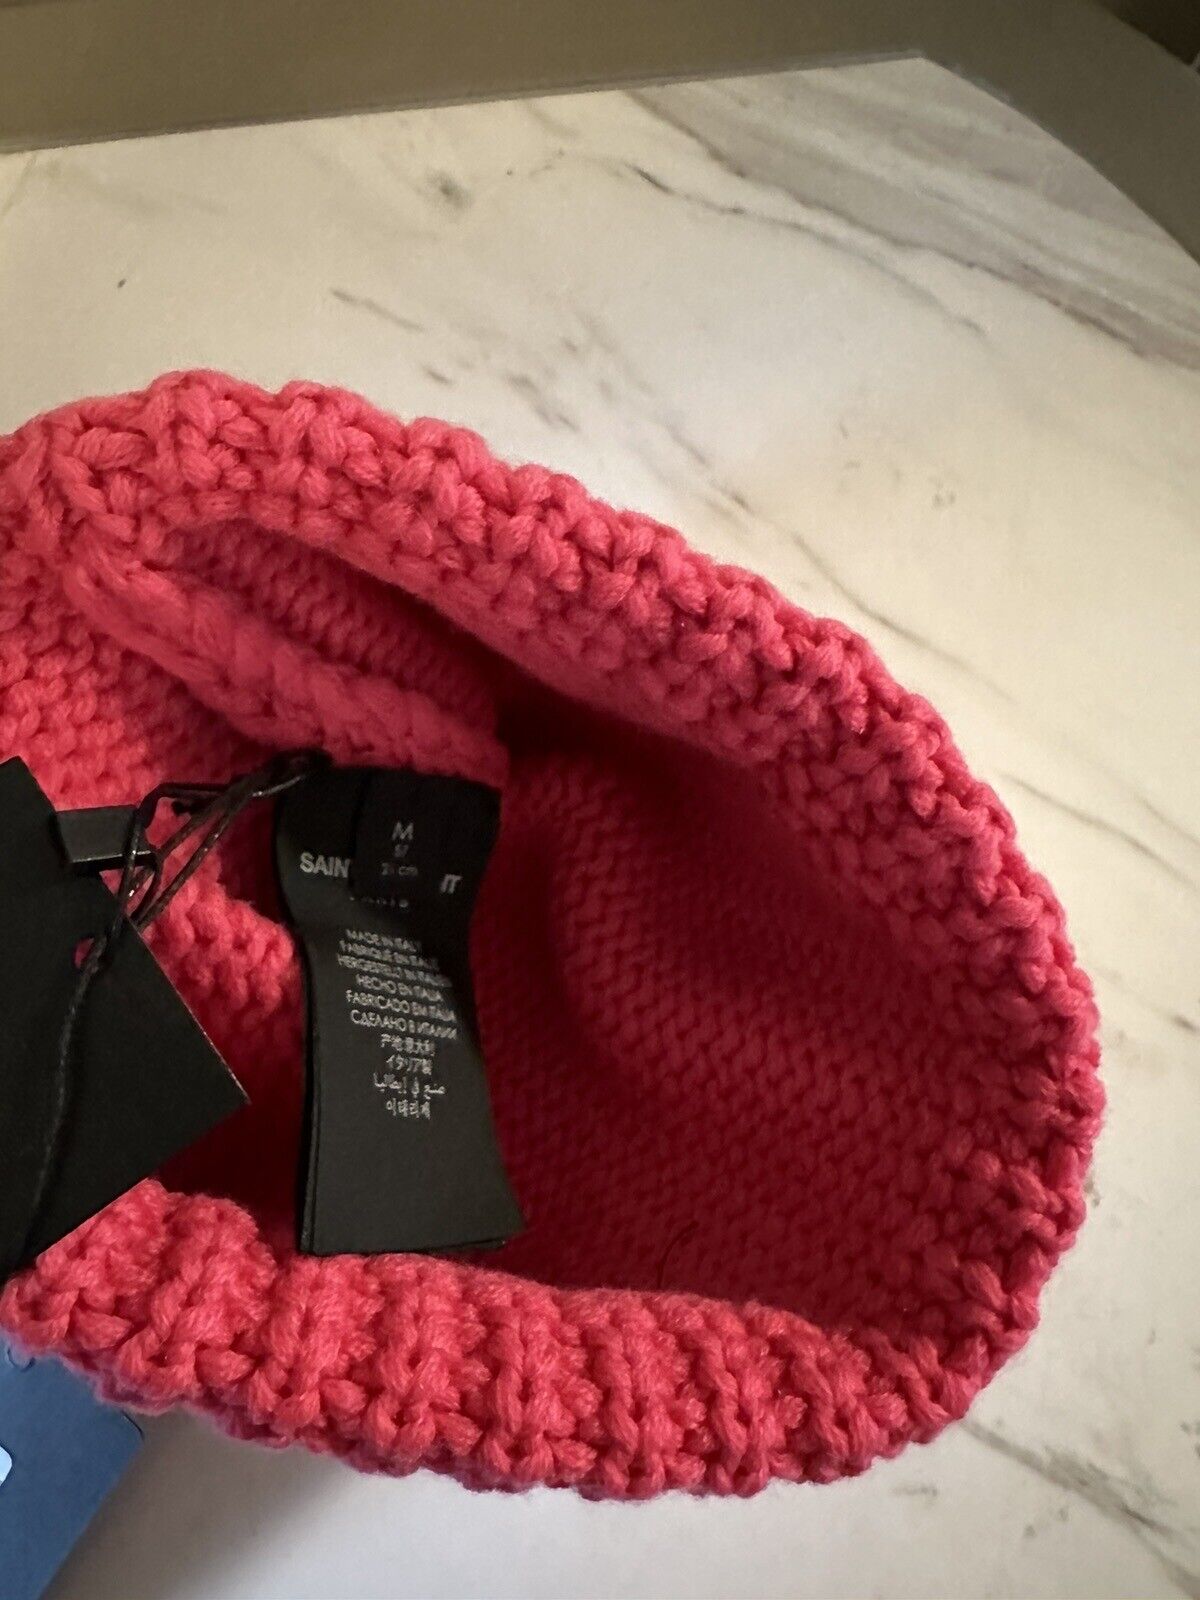 NWT Saint Laurent Women Knitted cuff Cashmere Beanie Hat Color Fucsia/Red M